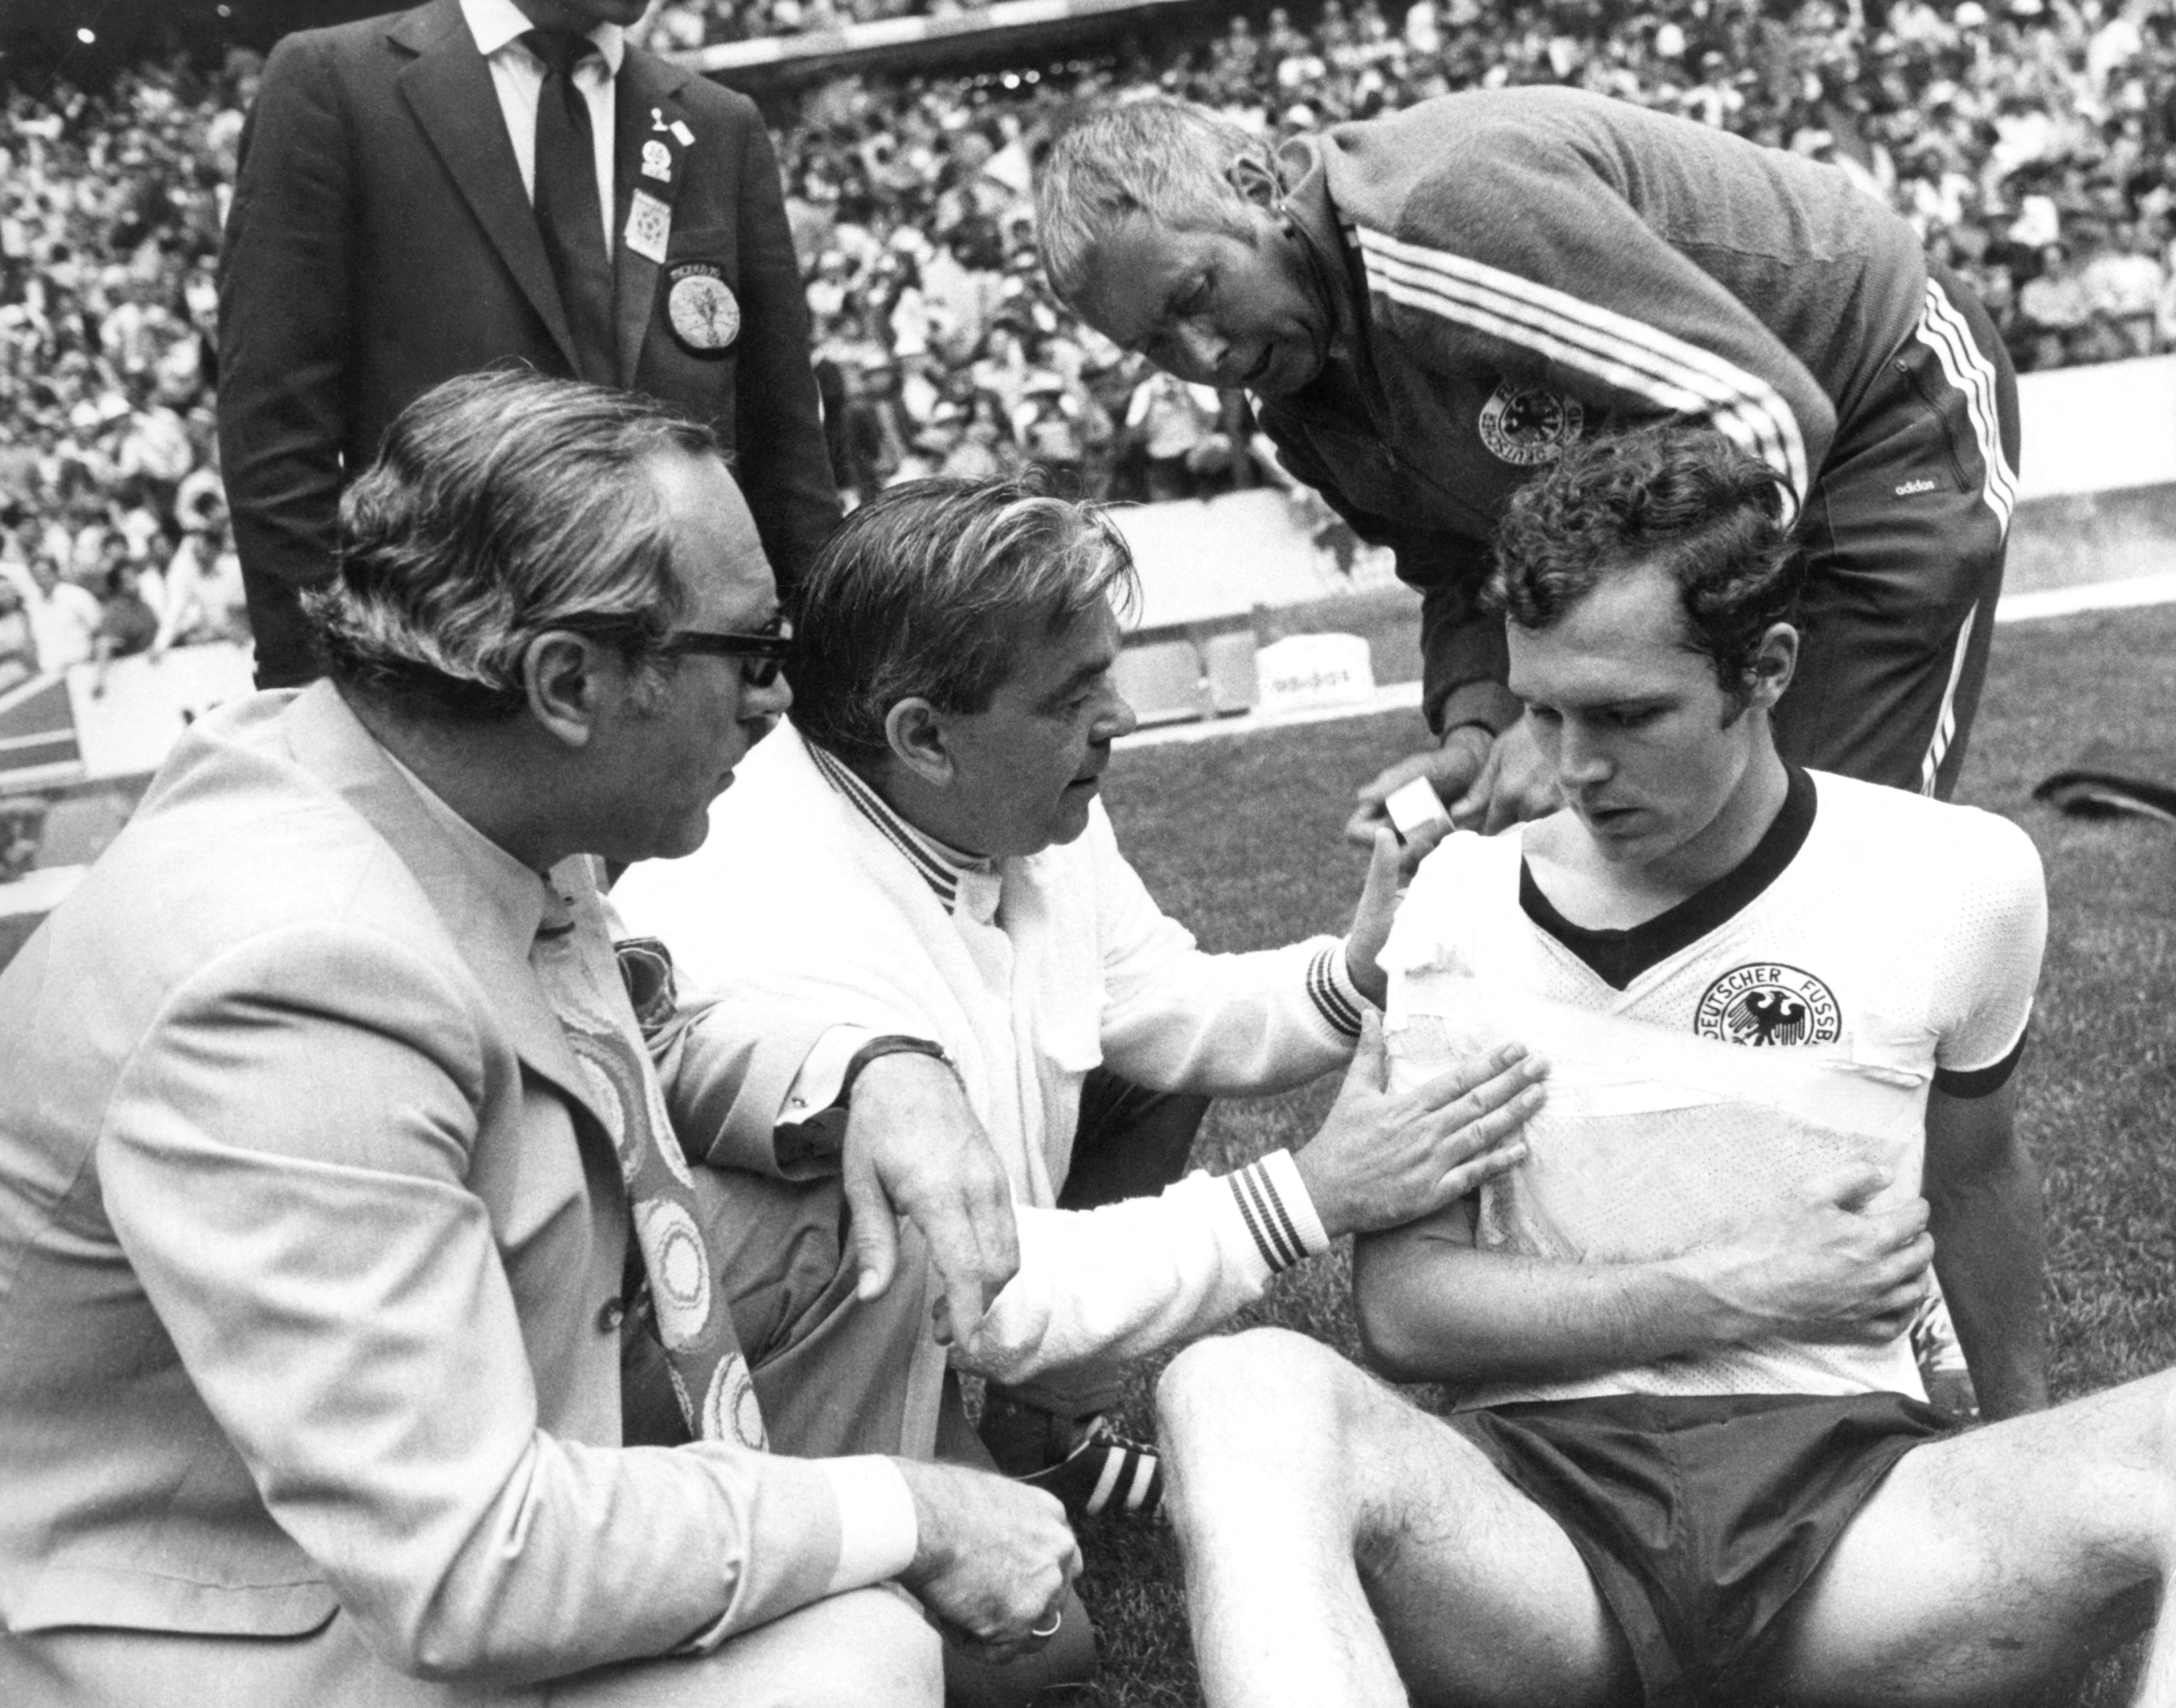 West German defender Franz Beckenbauer (R) gets his right shoulder bandaged by a masseur as the team's doctor Professor Schoberth (L) looks on during the World Cup semifinal soccer match against Italy 17 June 1982 at Azteca stadium in Mexico City. At the end of regulation time, the two teams were tied at 1 and Beckenbauer went on to play during the thirty-minute extra time period but could not prevent his team from losing 4-3 on a late goal by midfielder Gianni Rivera.    AFP PHOTO/EPA/DPA (Photo by DPA / dpa Picture-Alliance via AFP)